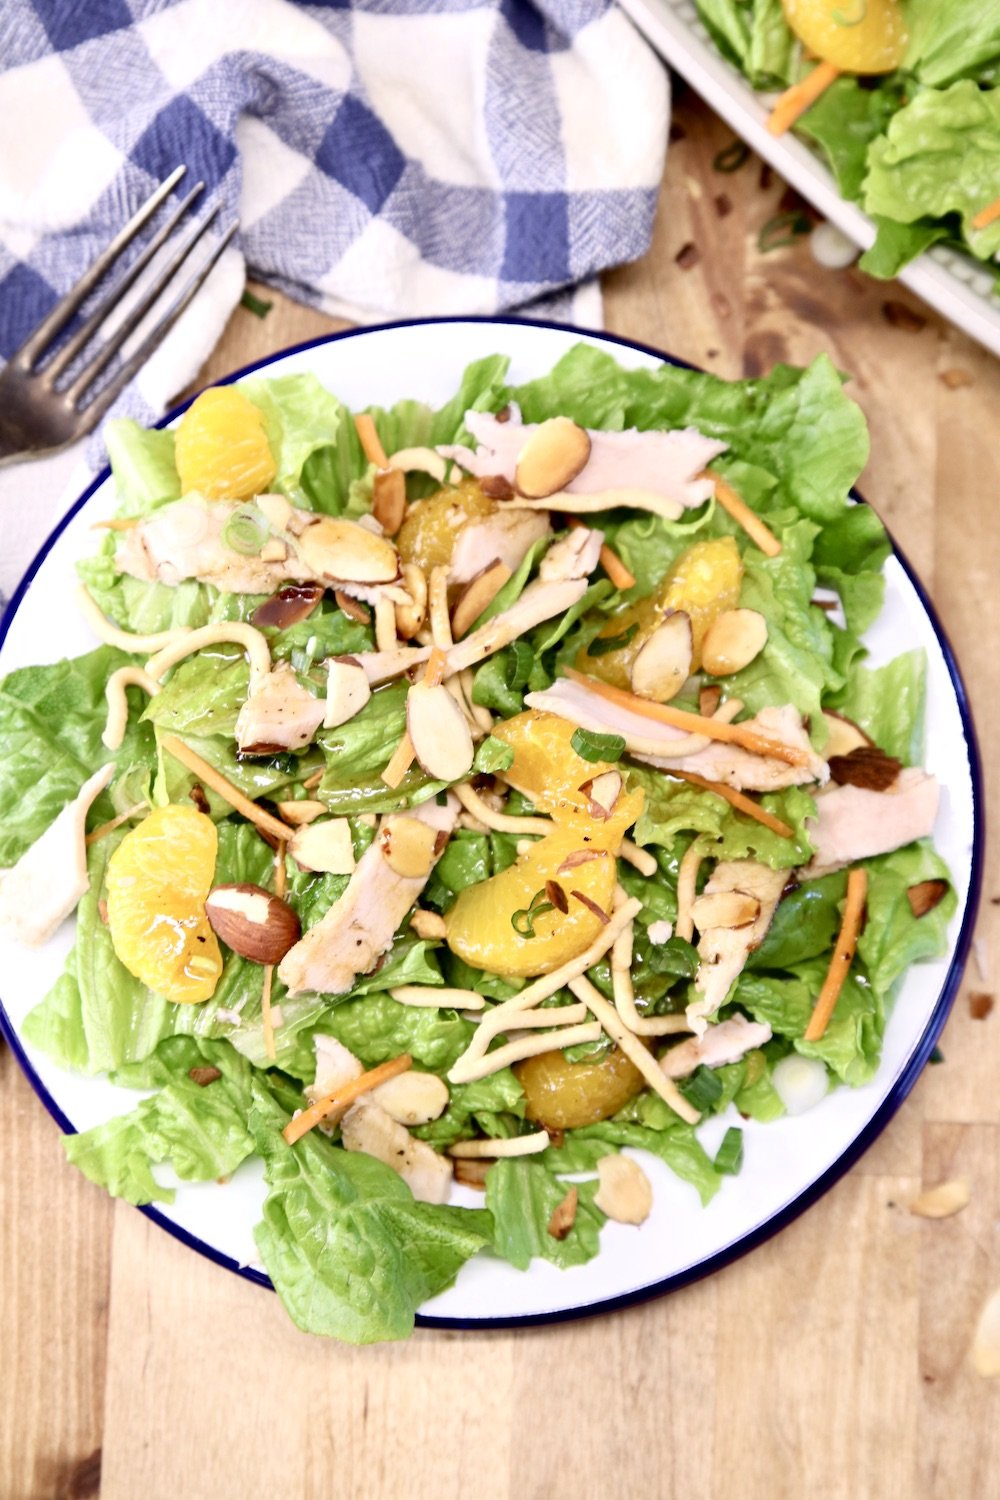 plate of salad with oranges and chicken